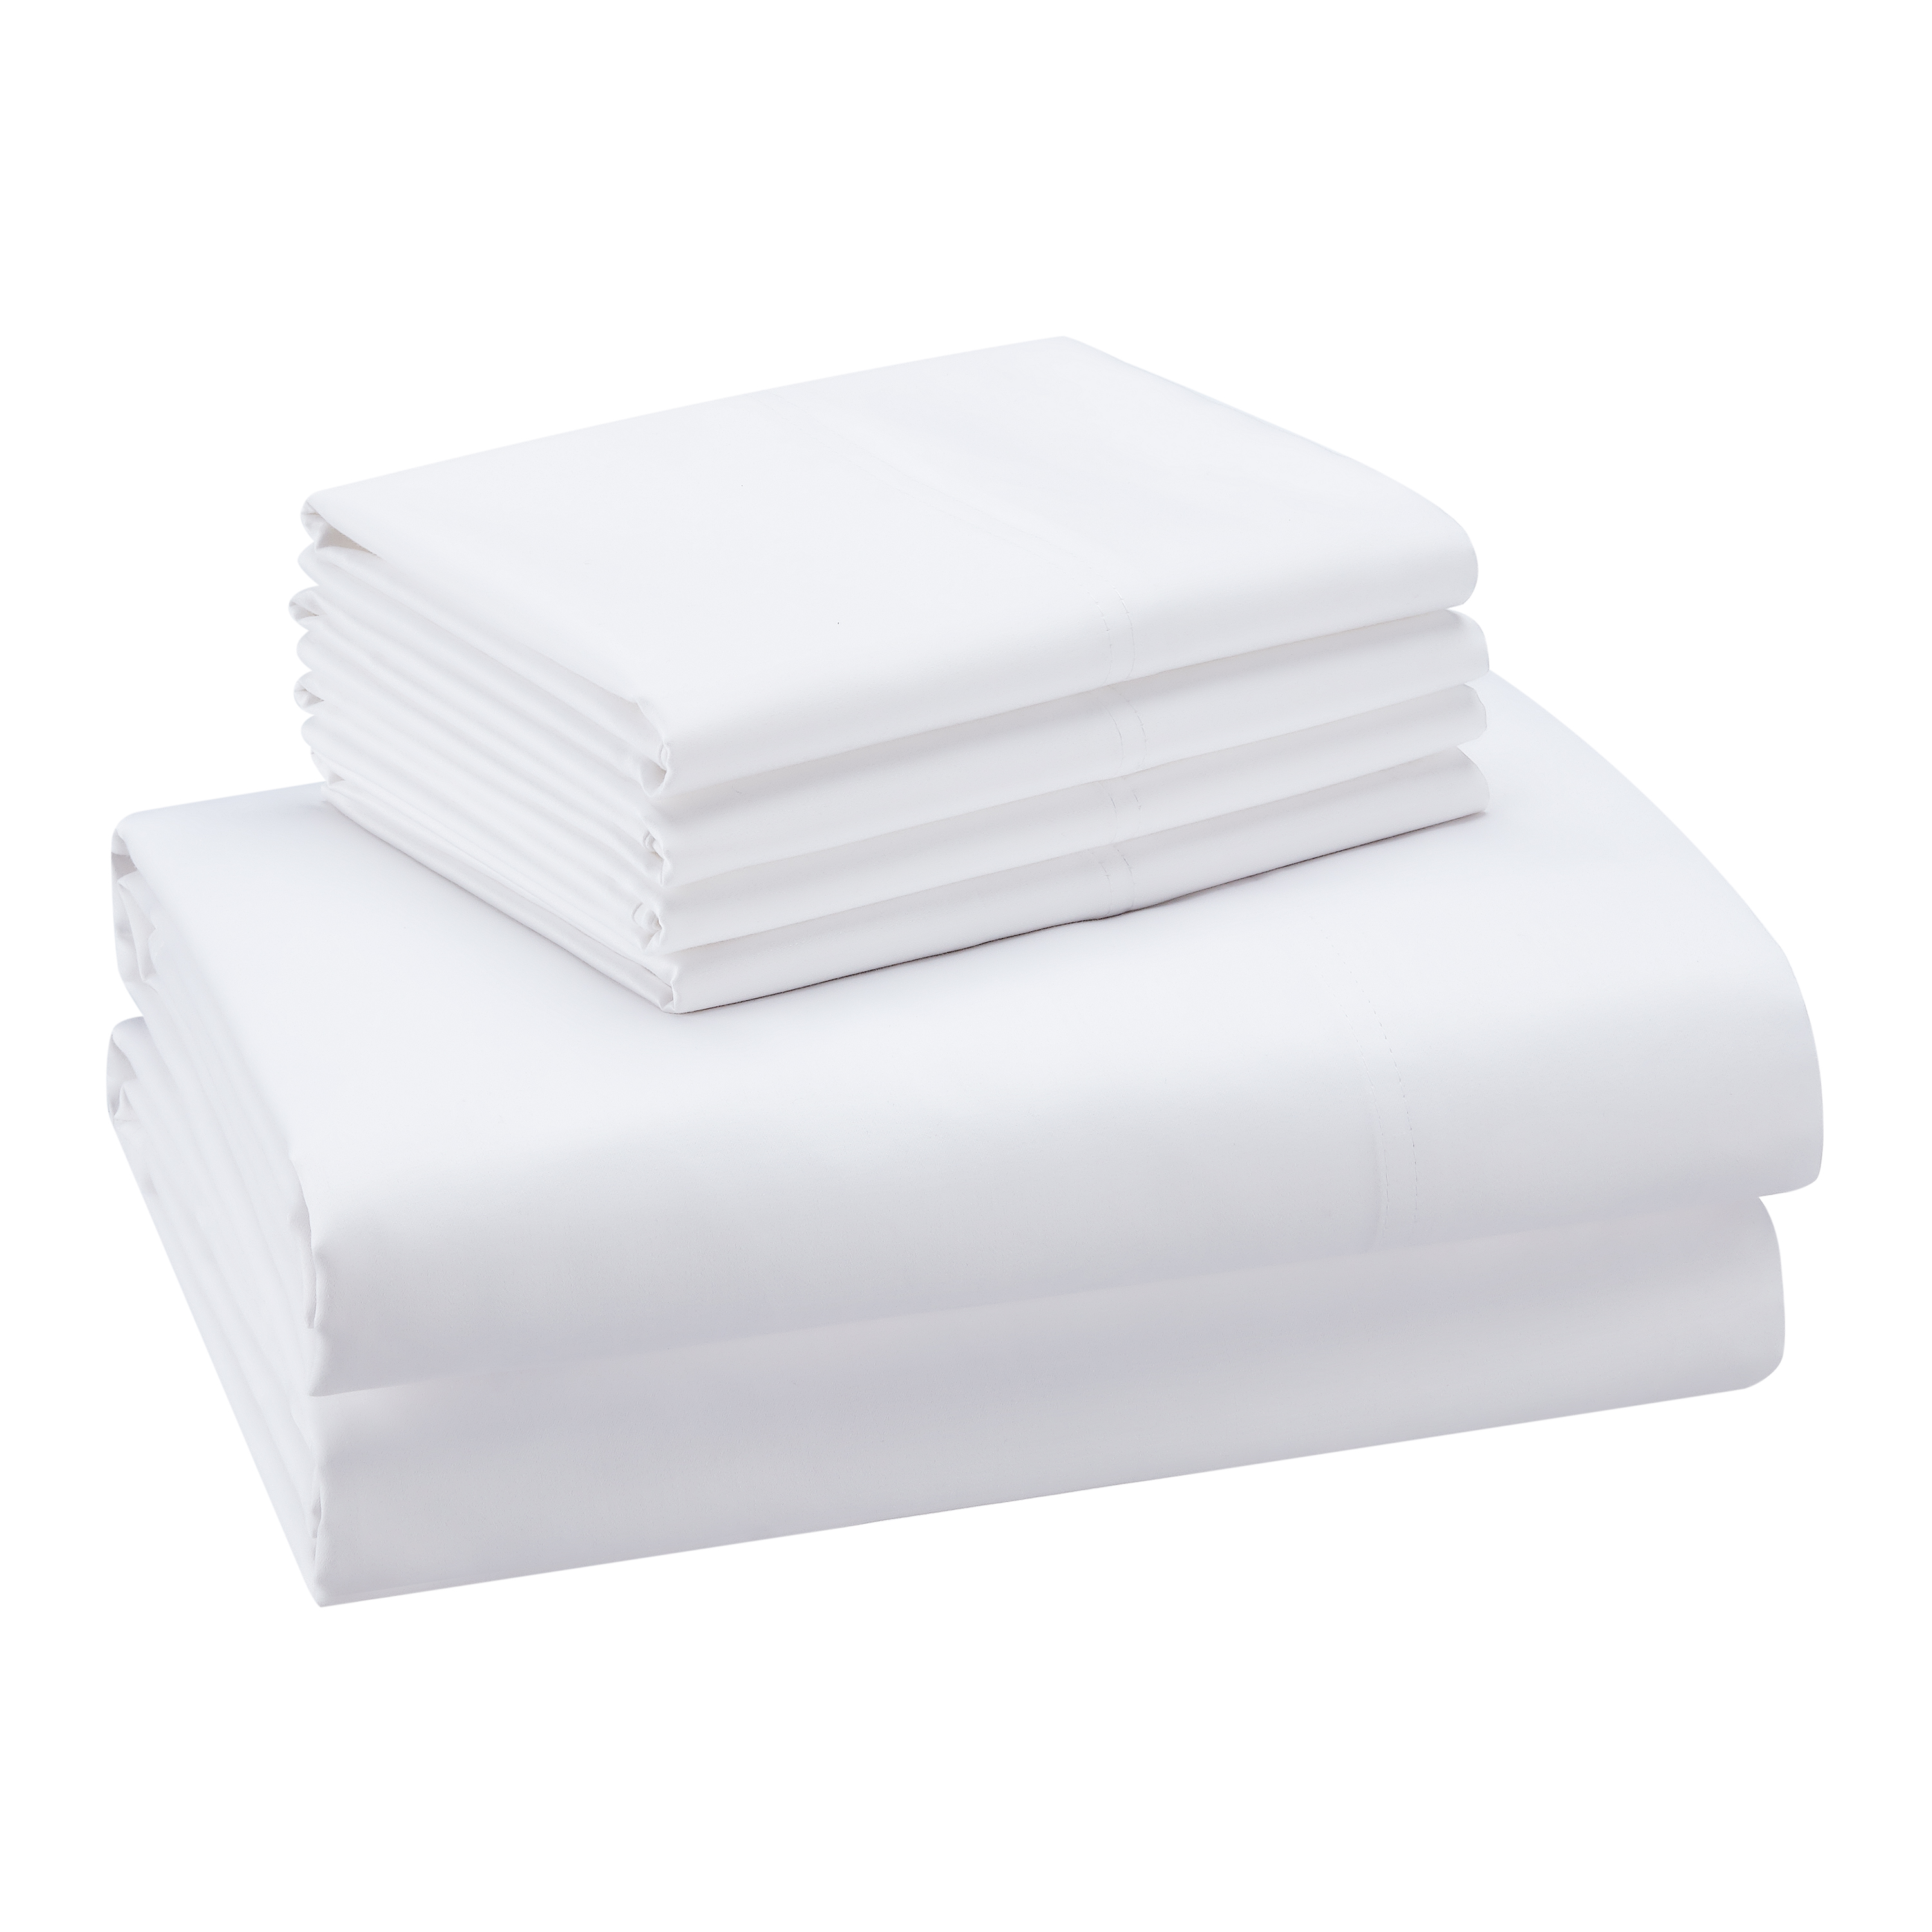 Hotel Style 1200 Thread Count Cotton Rich 6-Piece Sheet Set, White Color, King - image 1 of 7